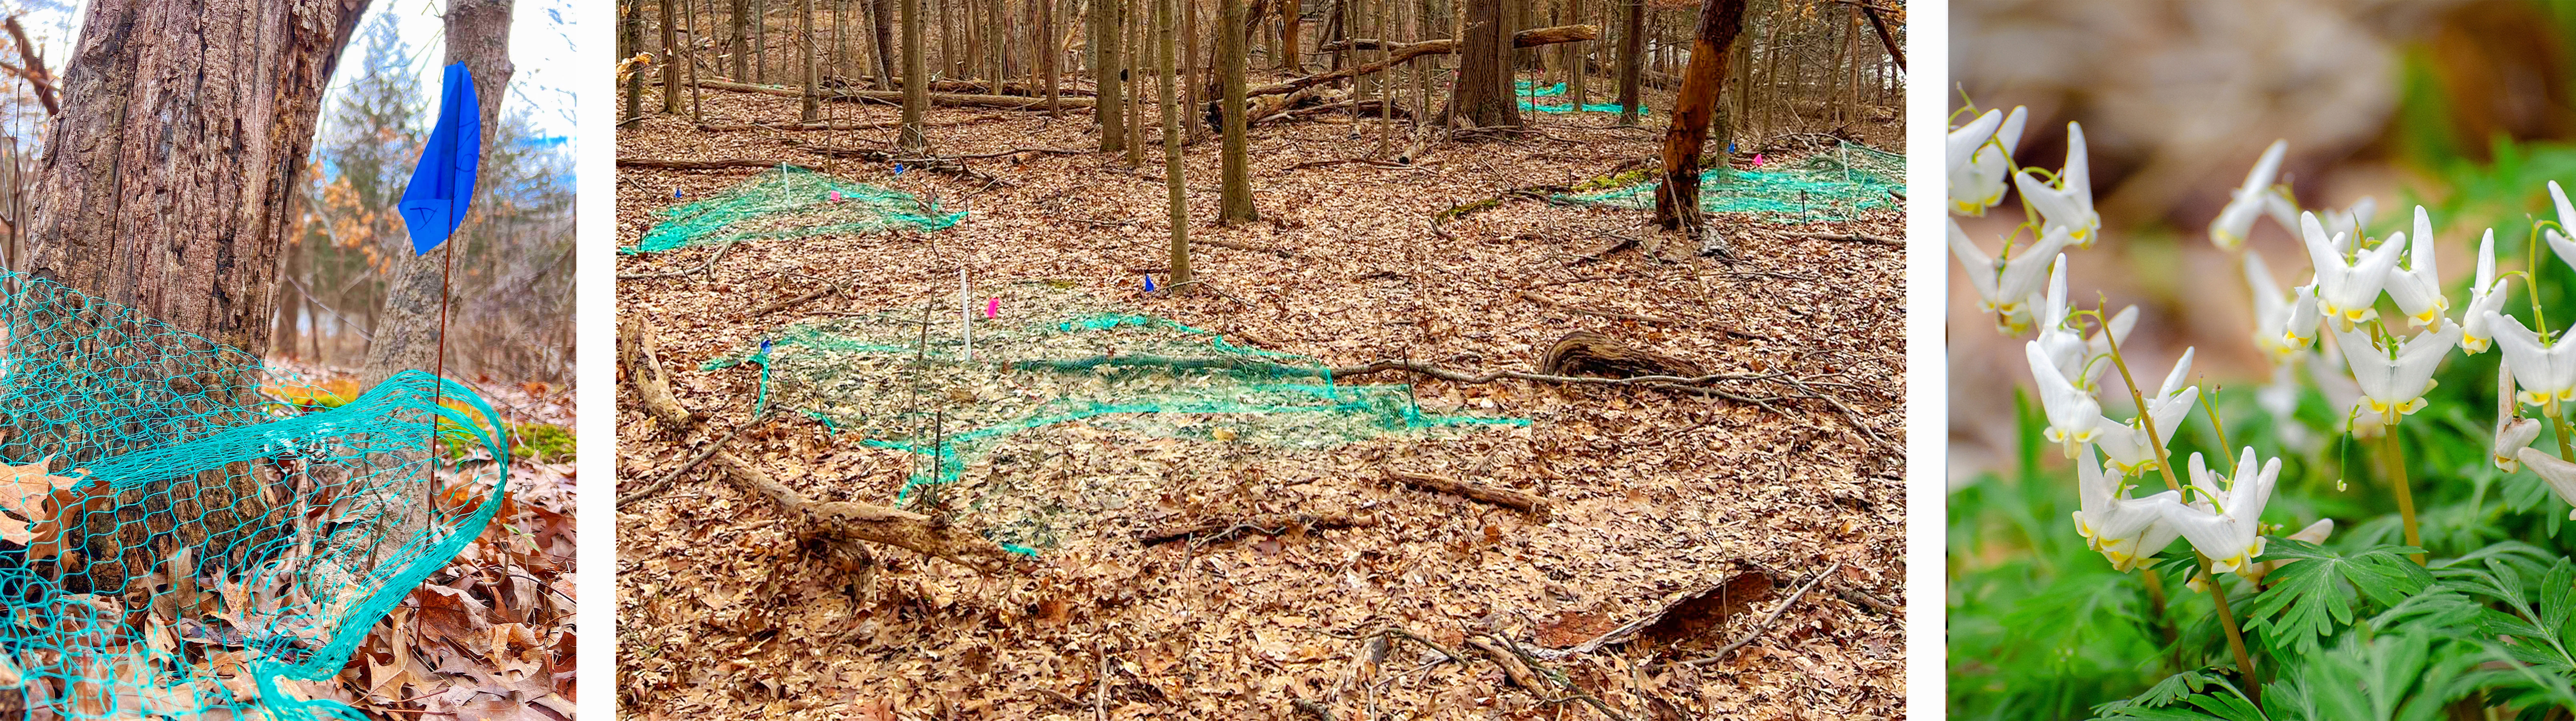 Green net with blue flag on a leaf covered ground near a tree.